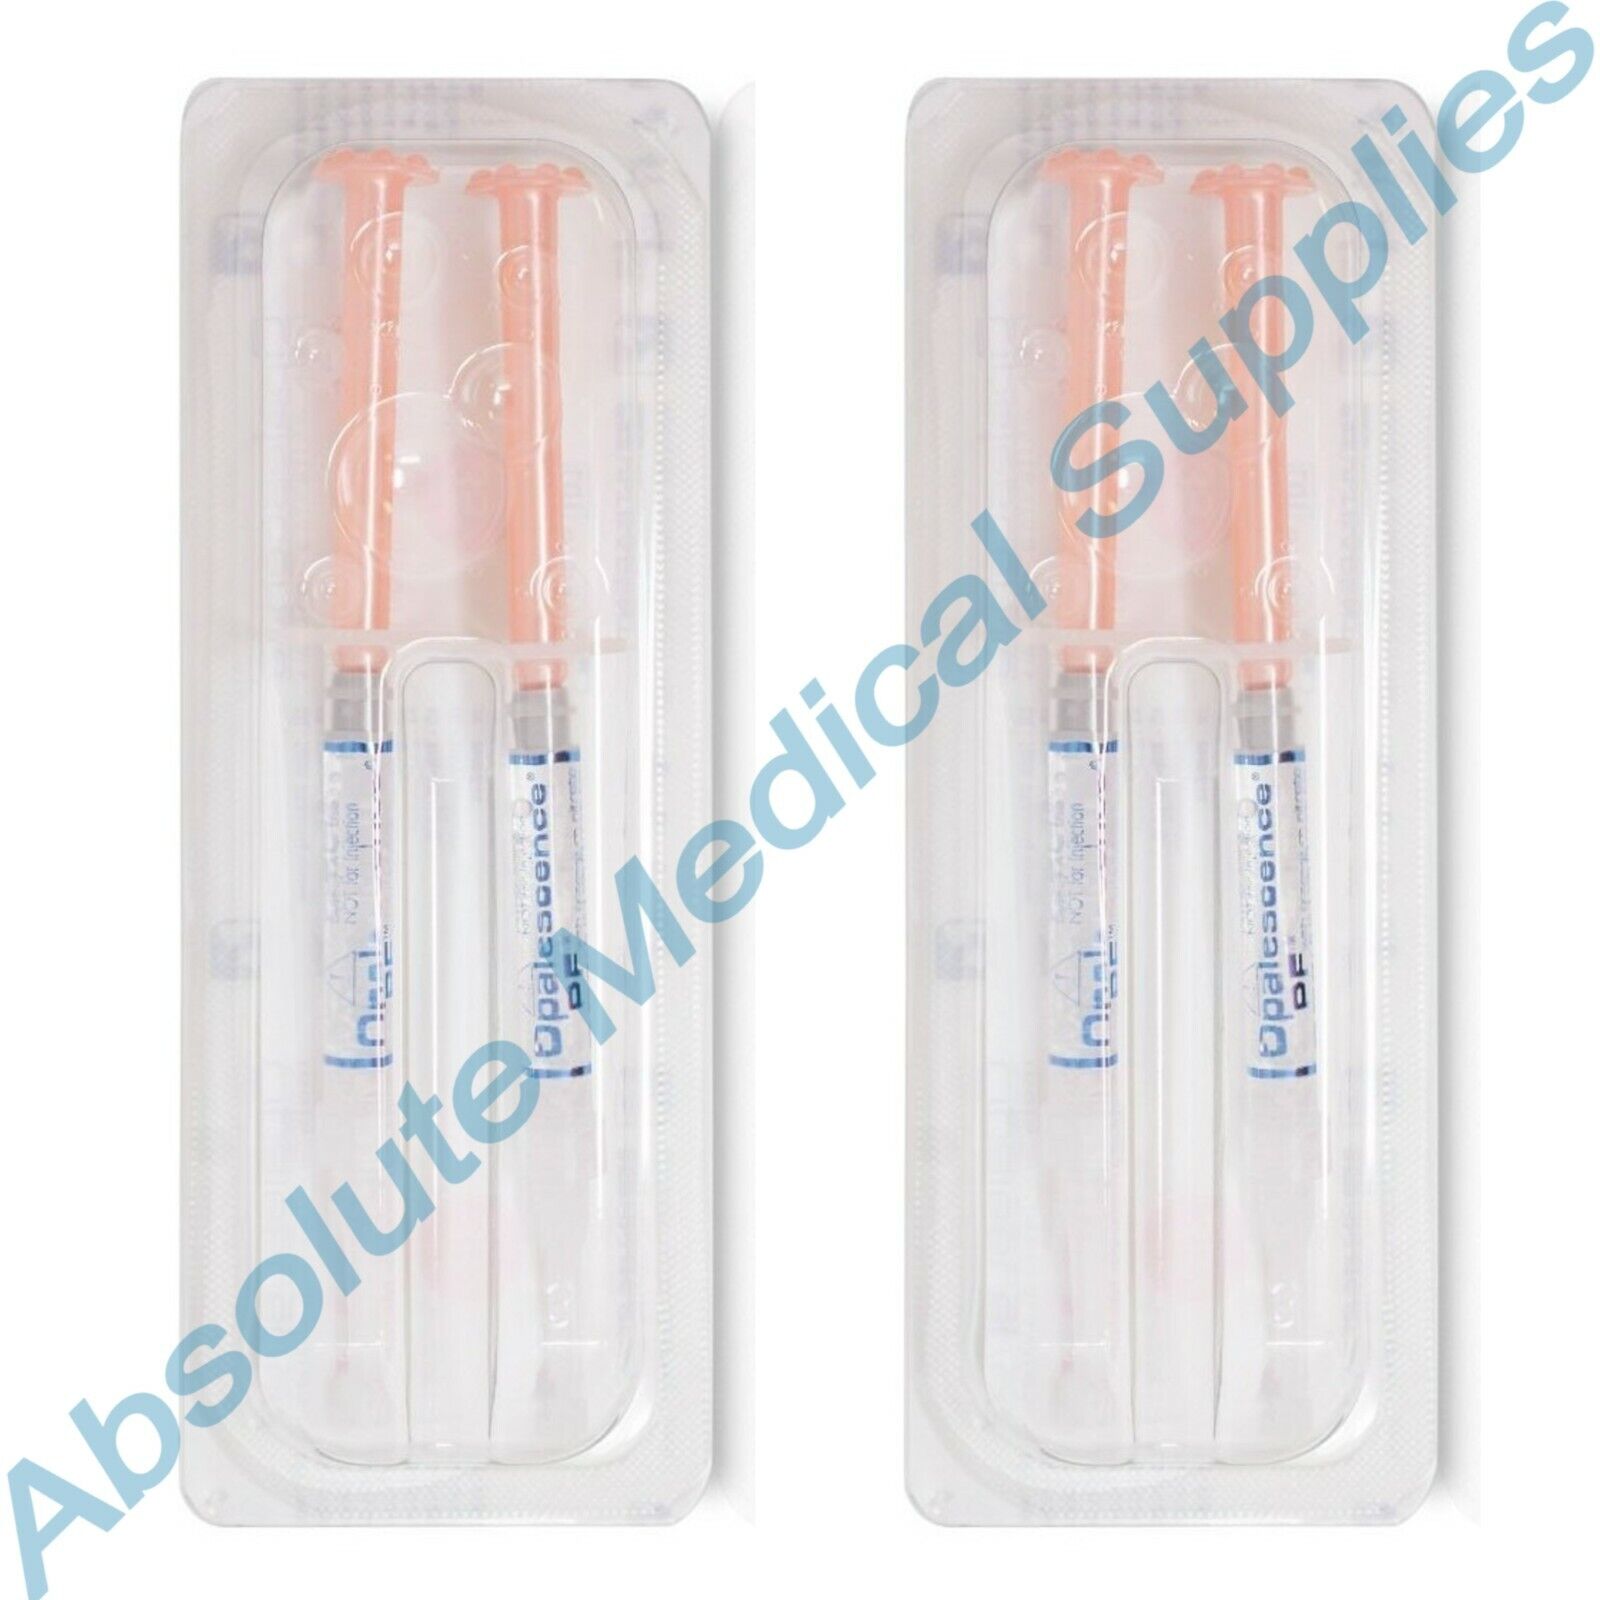 *2-Pack* Ultradent Opalescence PF 35% Tooth Whitening Refills Melon Flavor 5404 Opalescence 5404-U